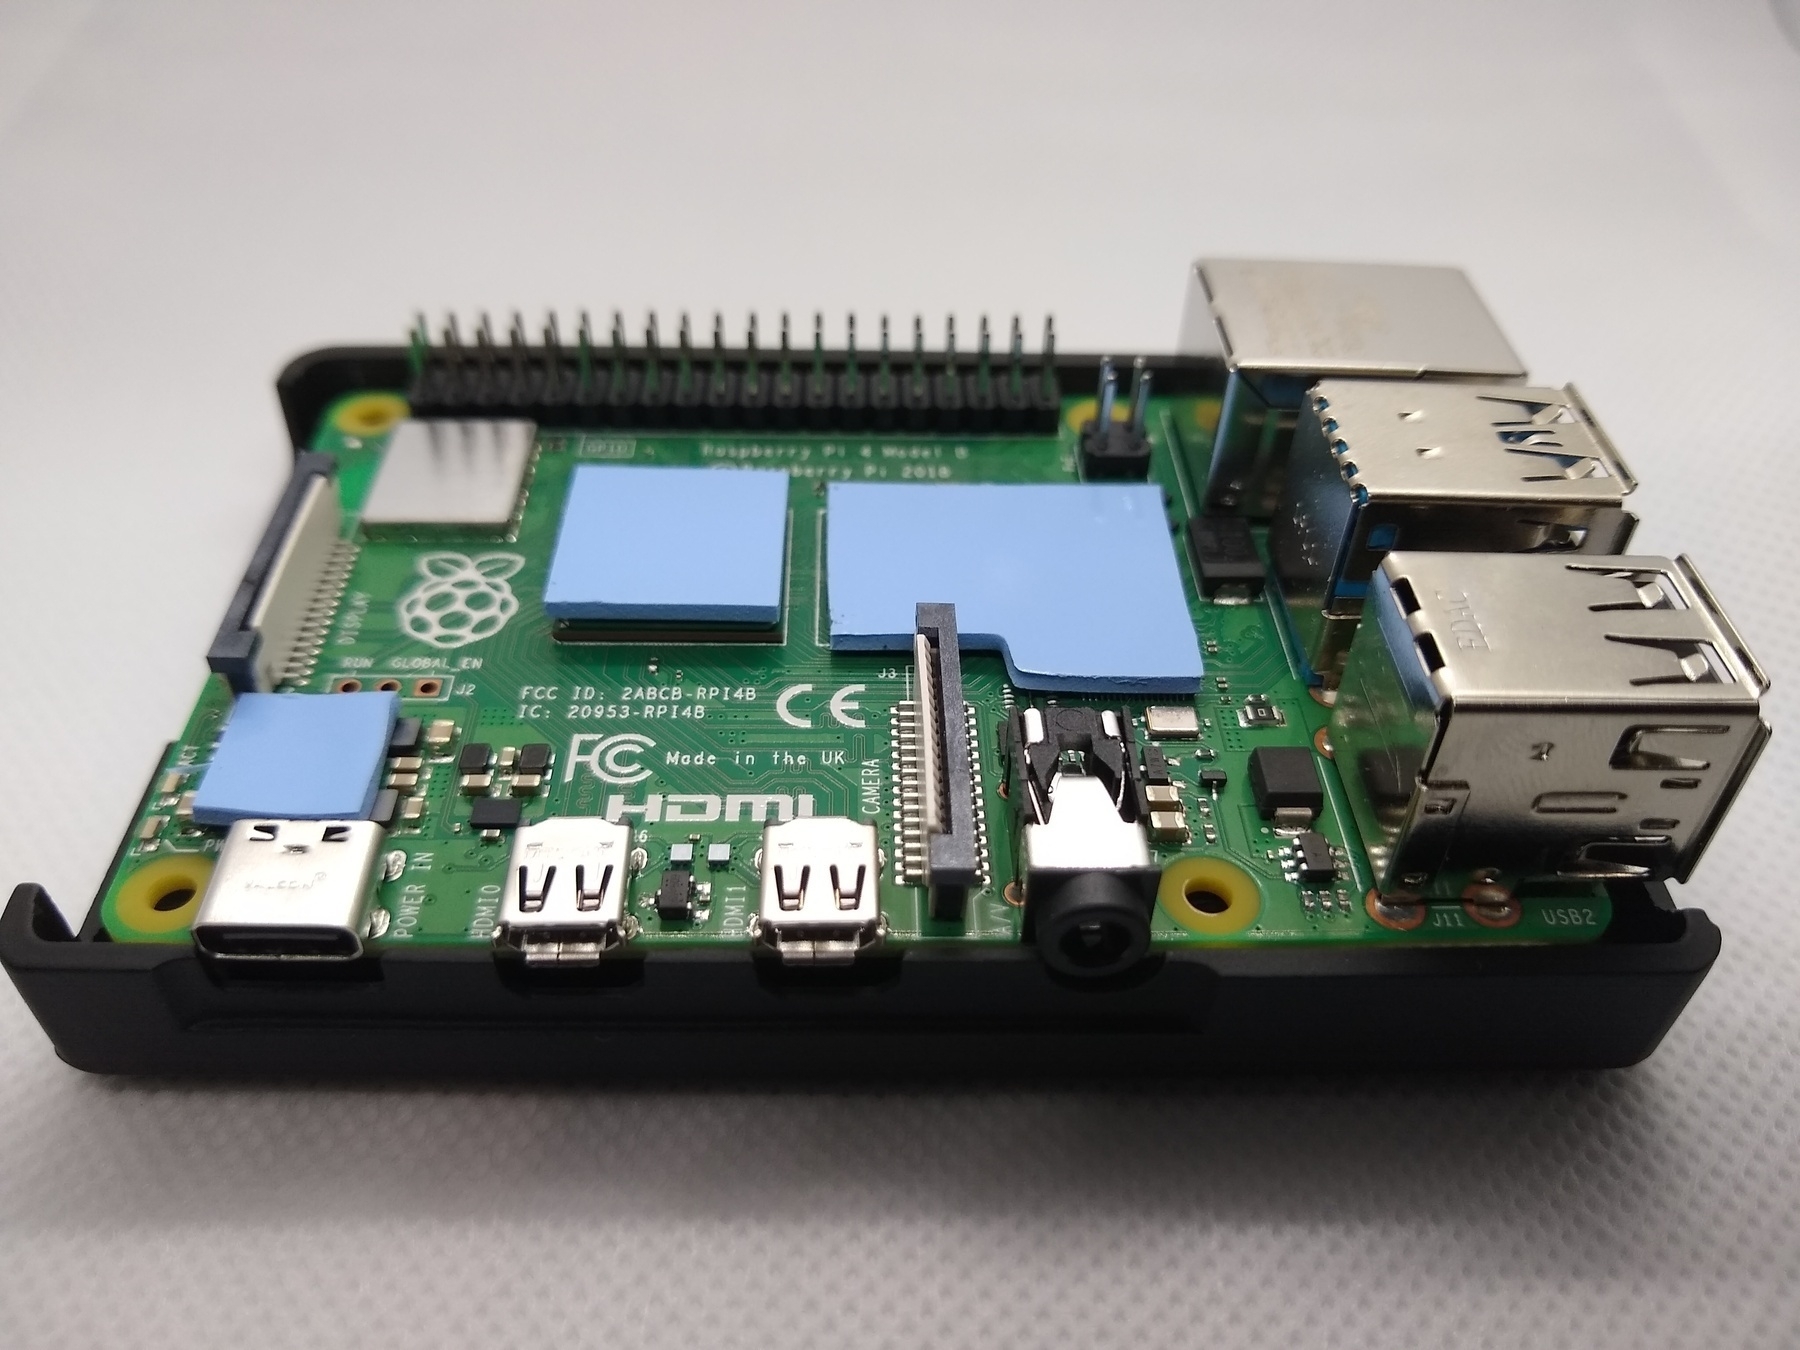 Raspberry PI 4 with awaiting the mounting of heat sinks